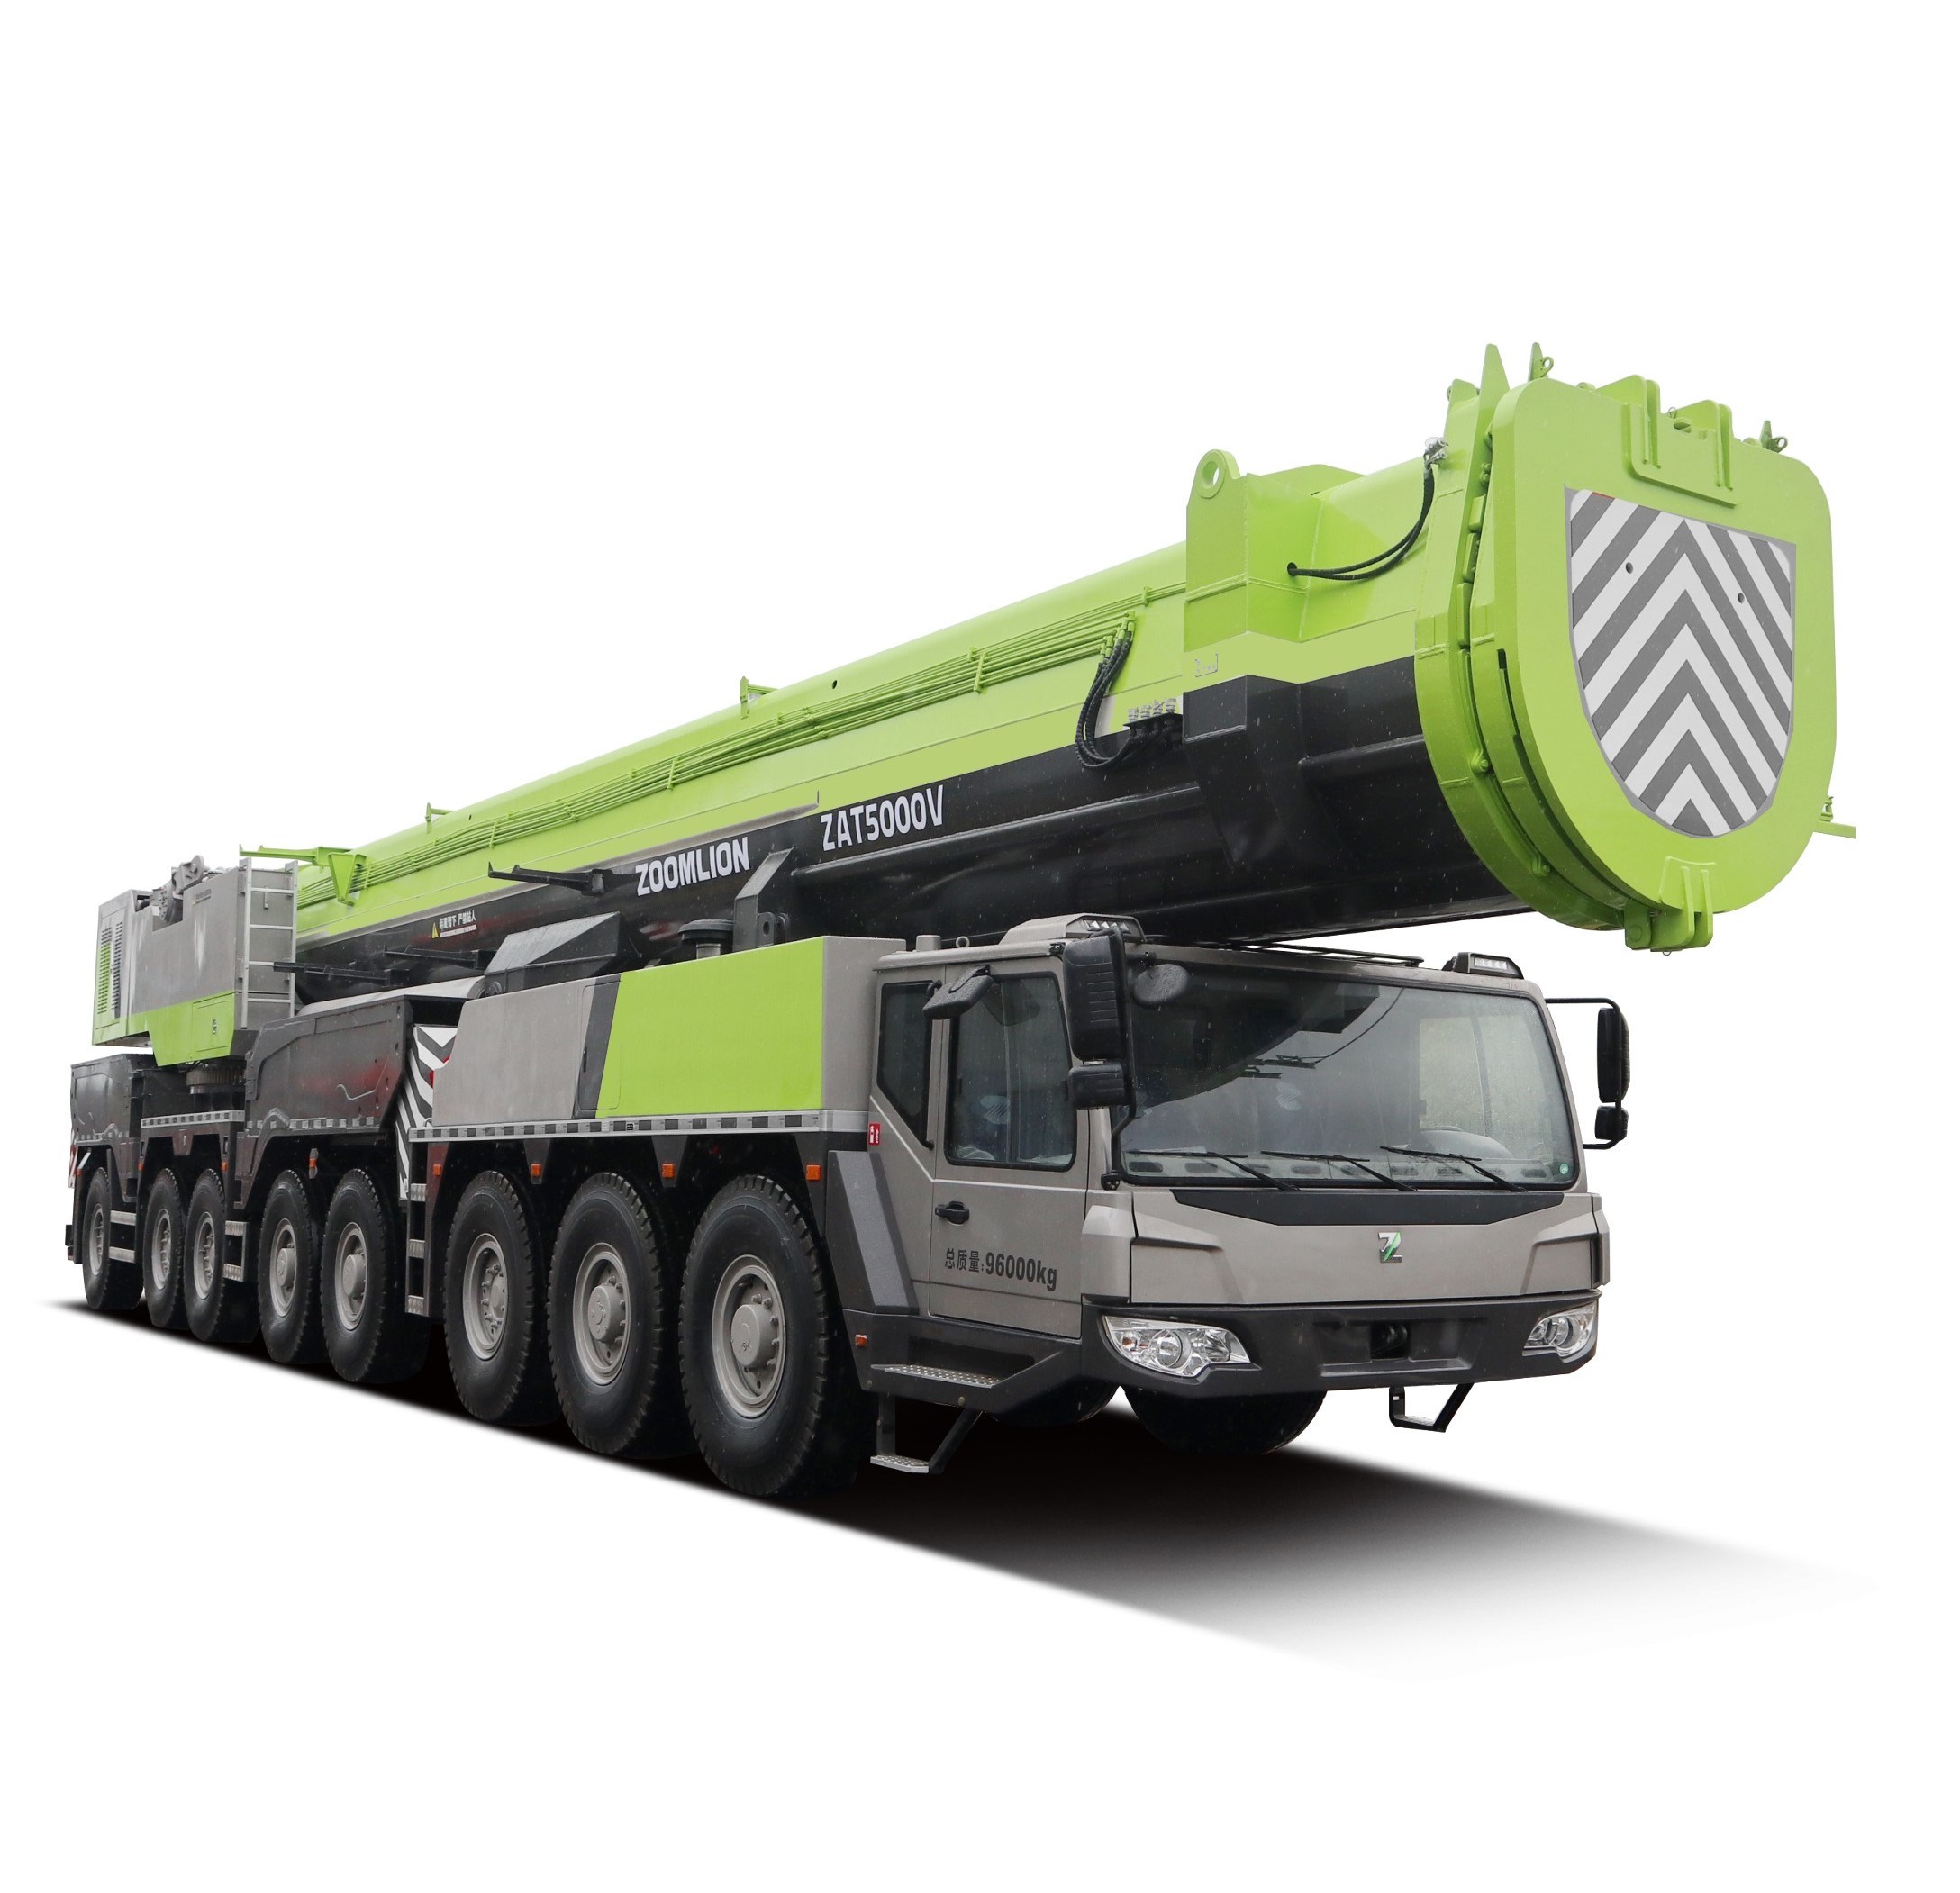 
                Zoomlion Biggest All Terrain Crane Zat18000h with 1800 Ton Lifting Capacity and 9 Section Main Boom
            